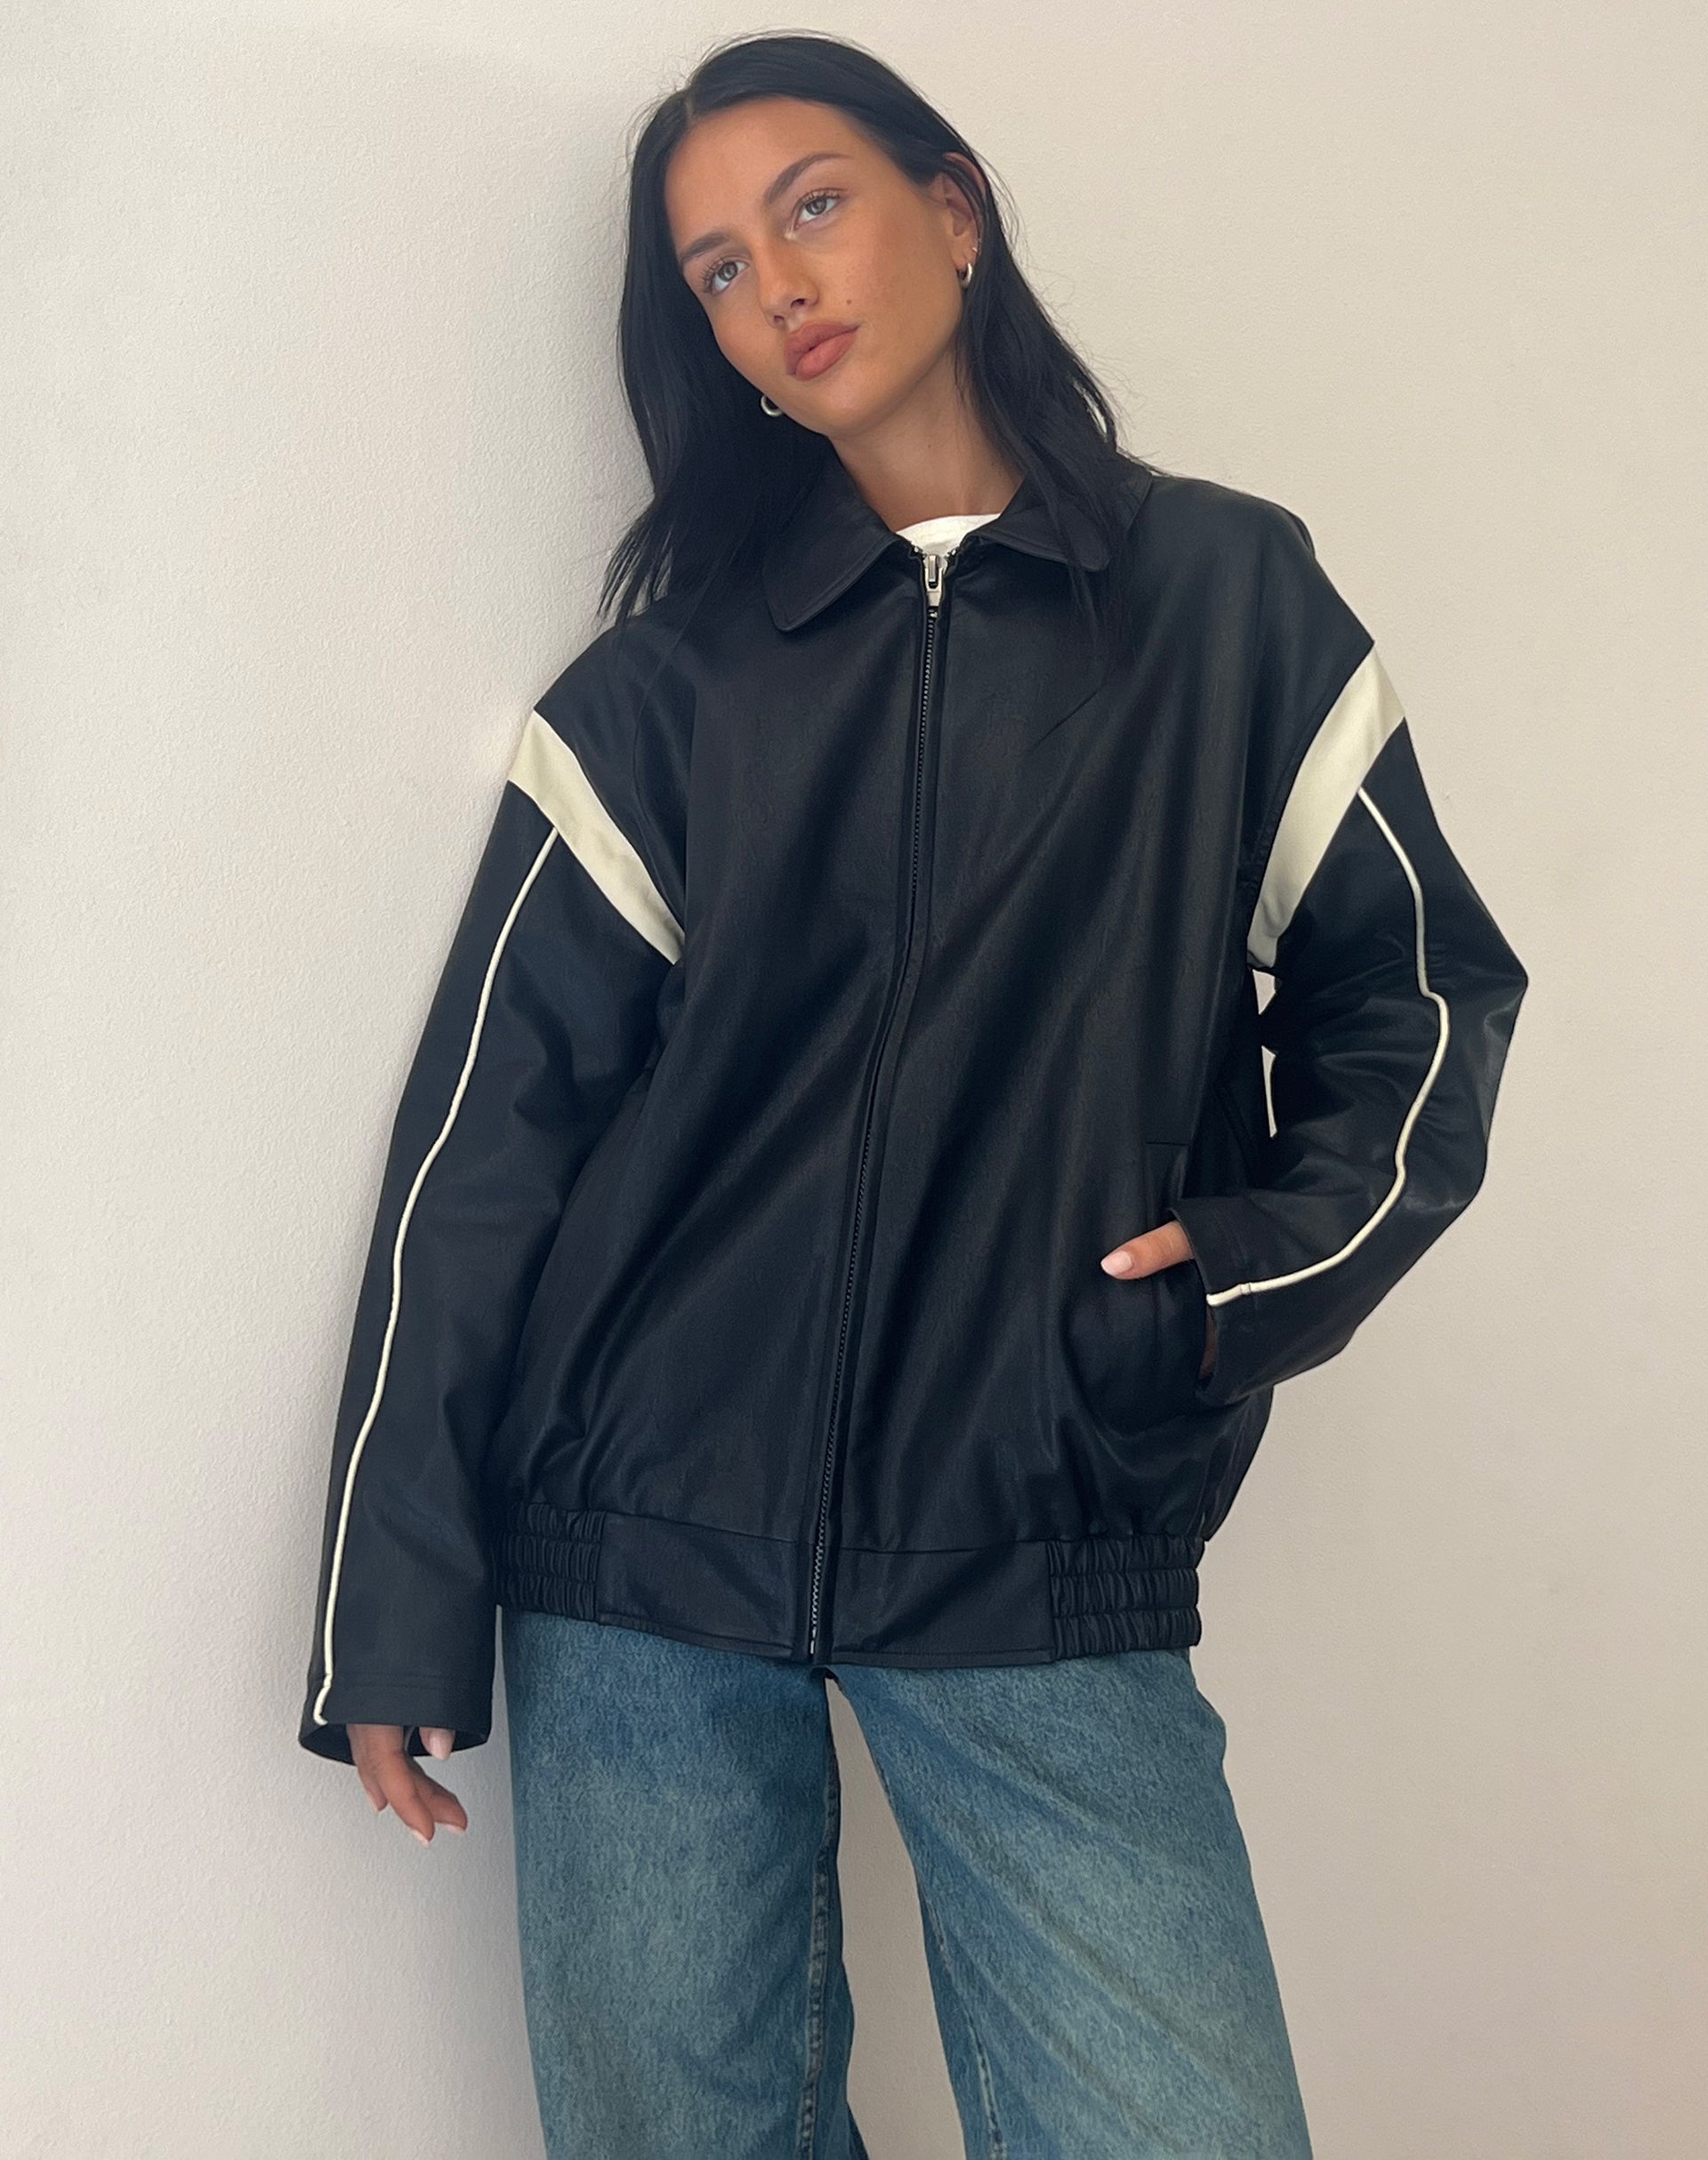 Image of Corvina PU Jacket in Black with Ivory